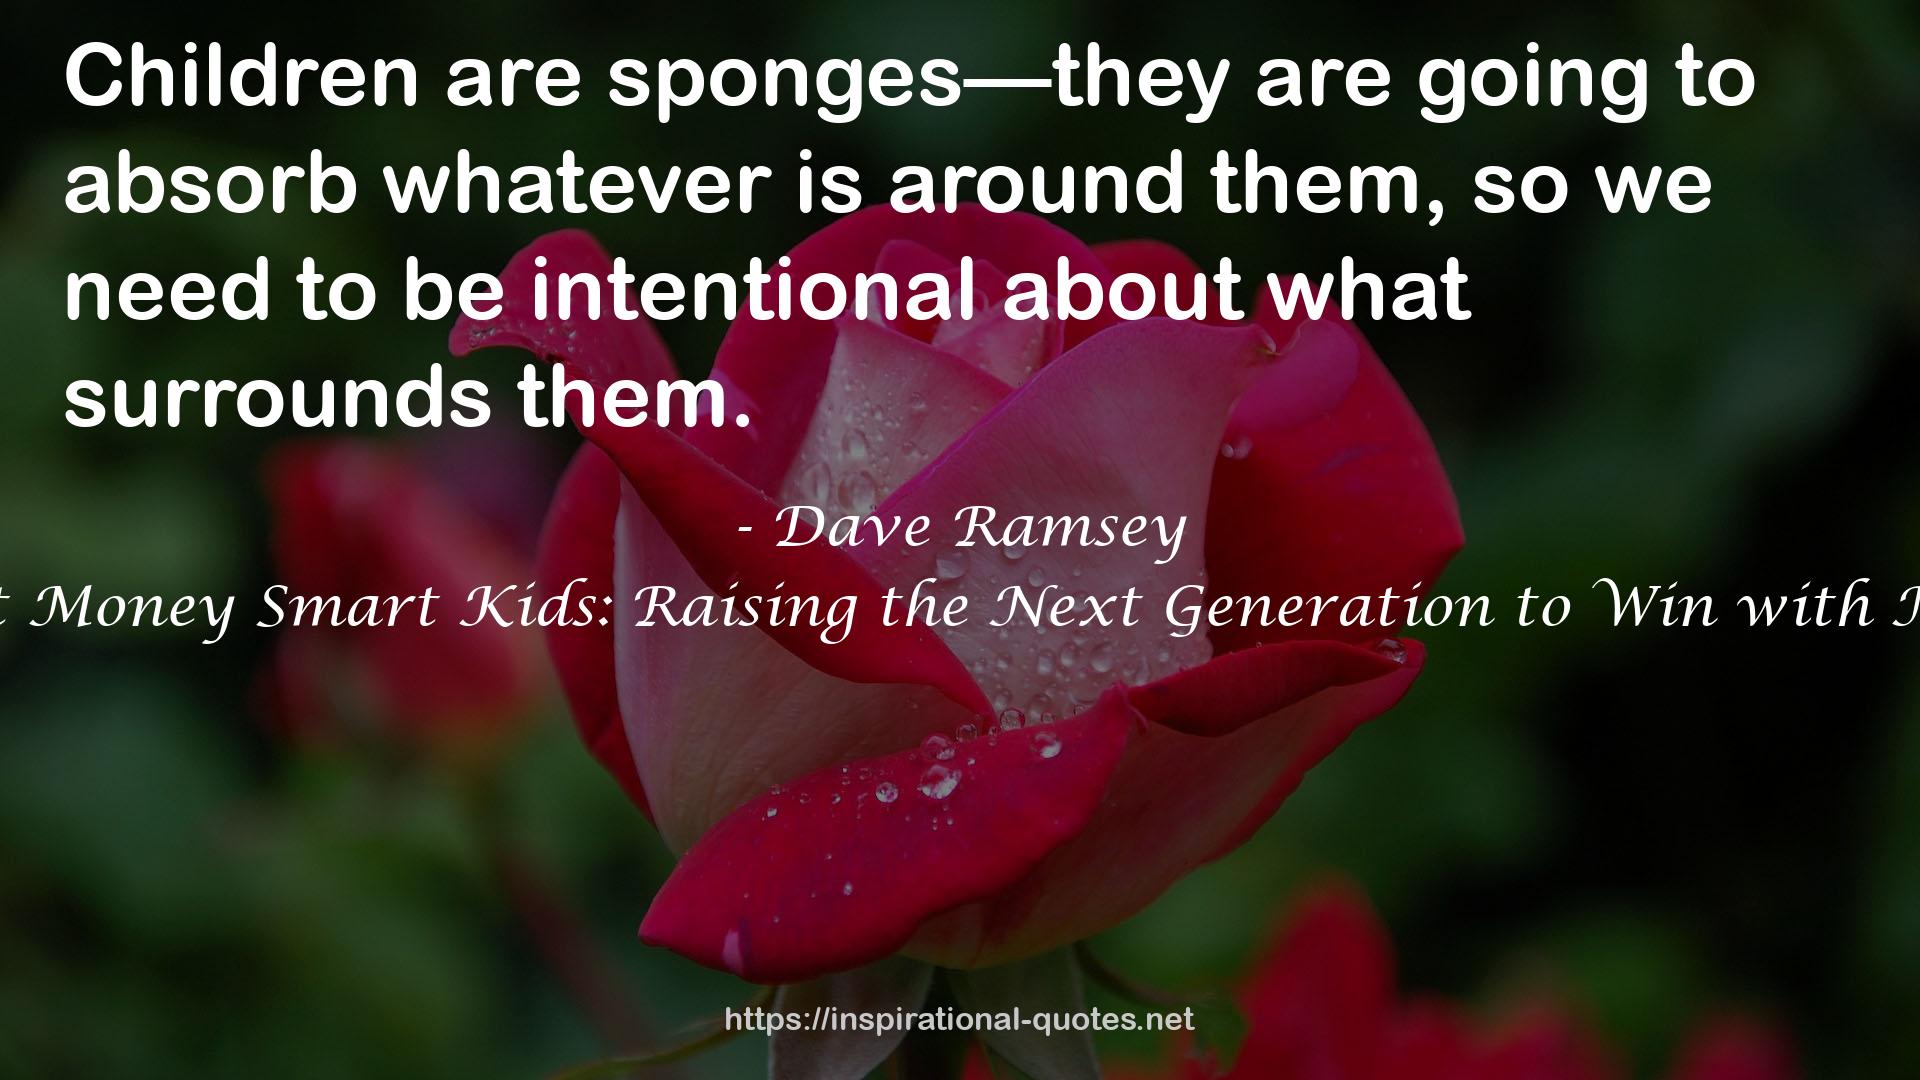 Smart Money Smart Kids: Raising the Next Generation to Win with Money QUOTES